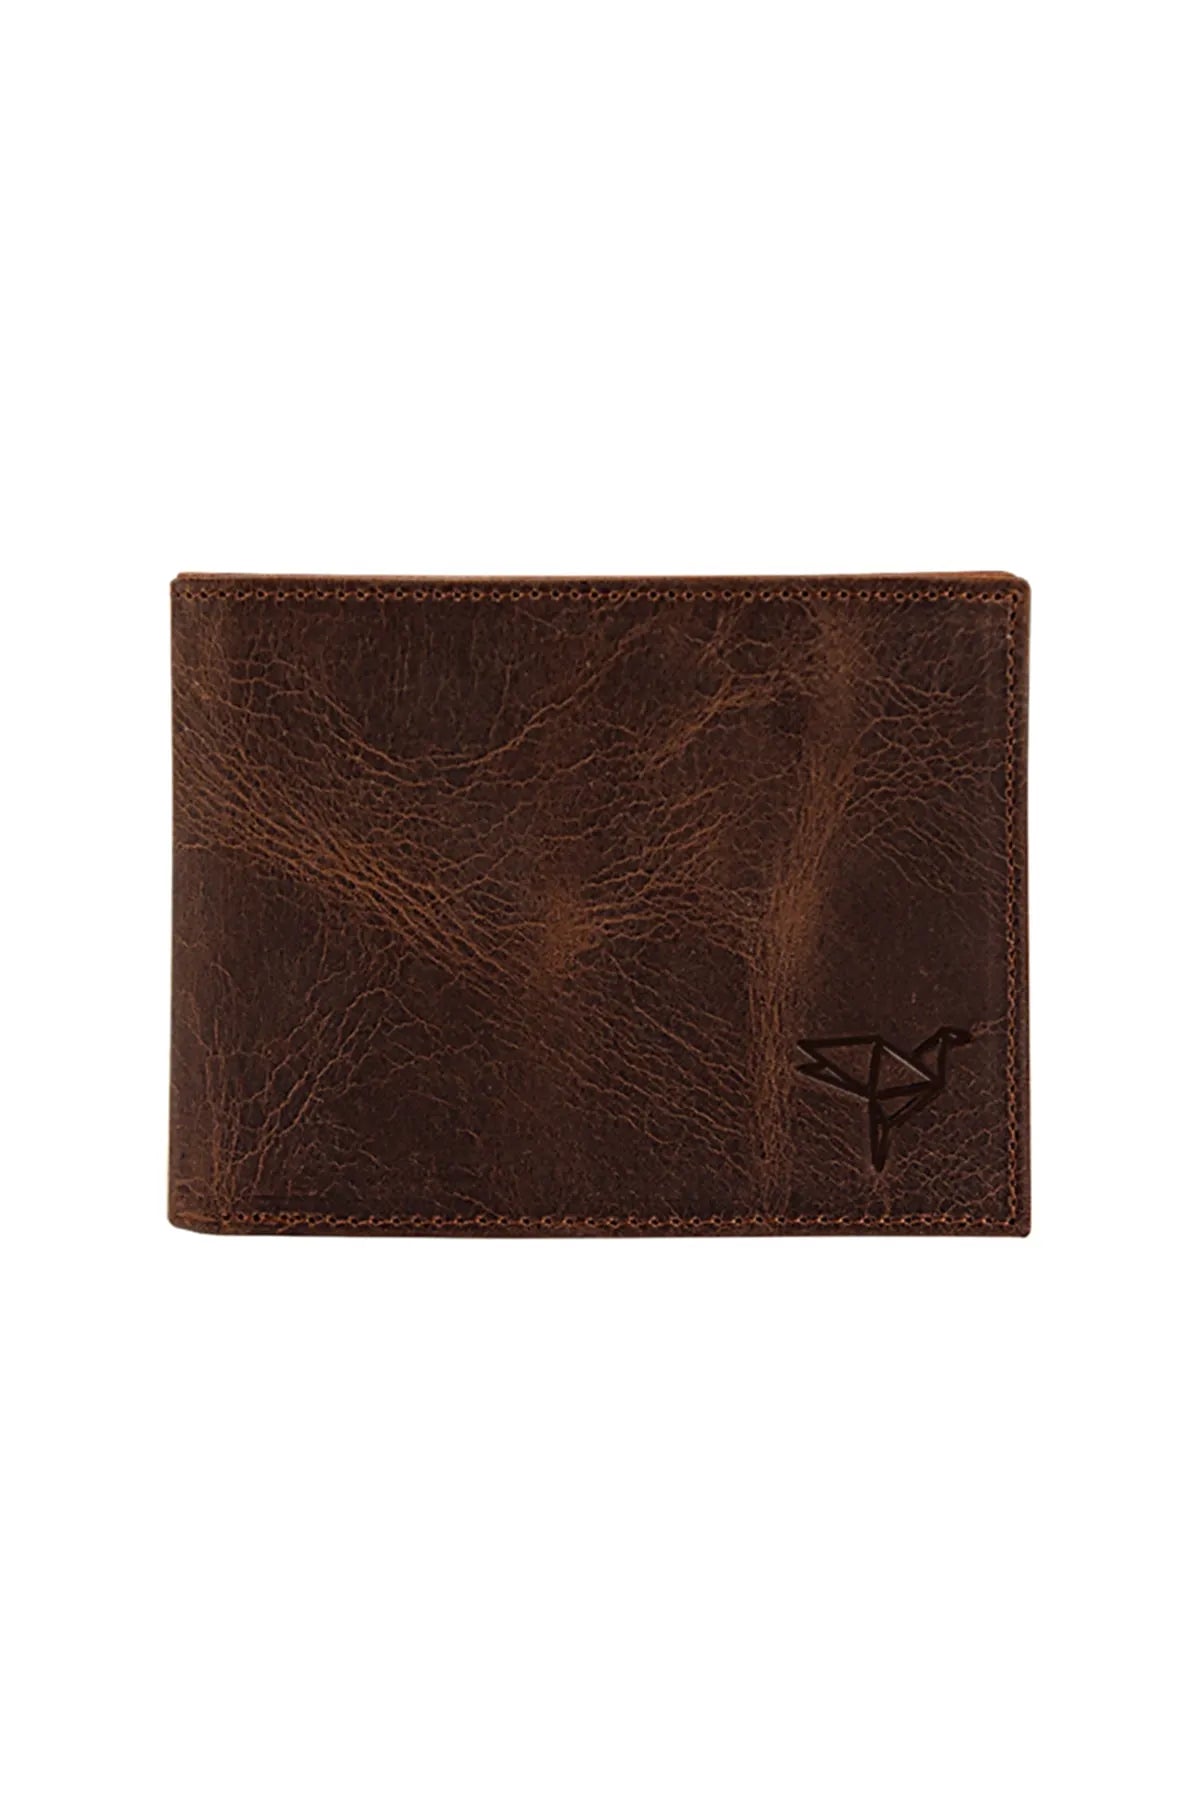 Jackson Genuine Leather RFID Blocking Brown Wallet with Coin Compartment for Men: A Stylish and Secure Choice